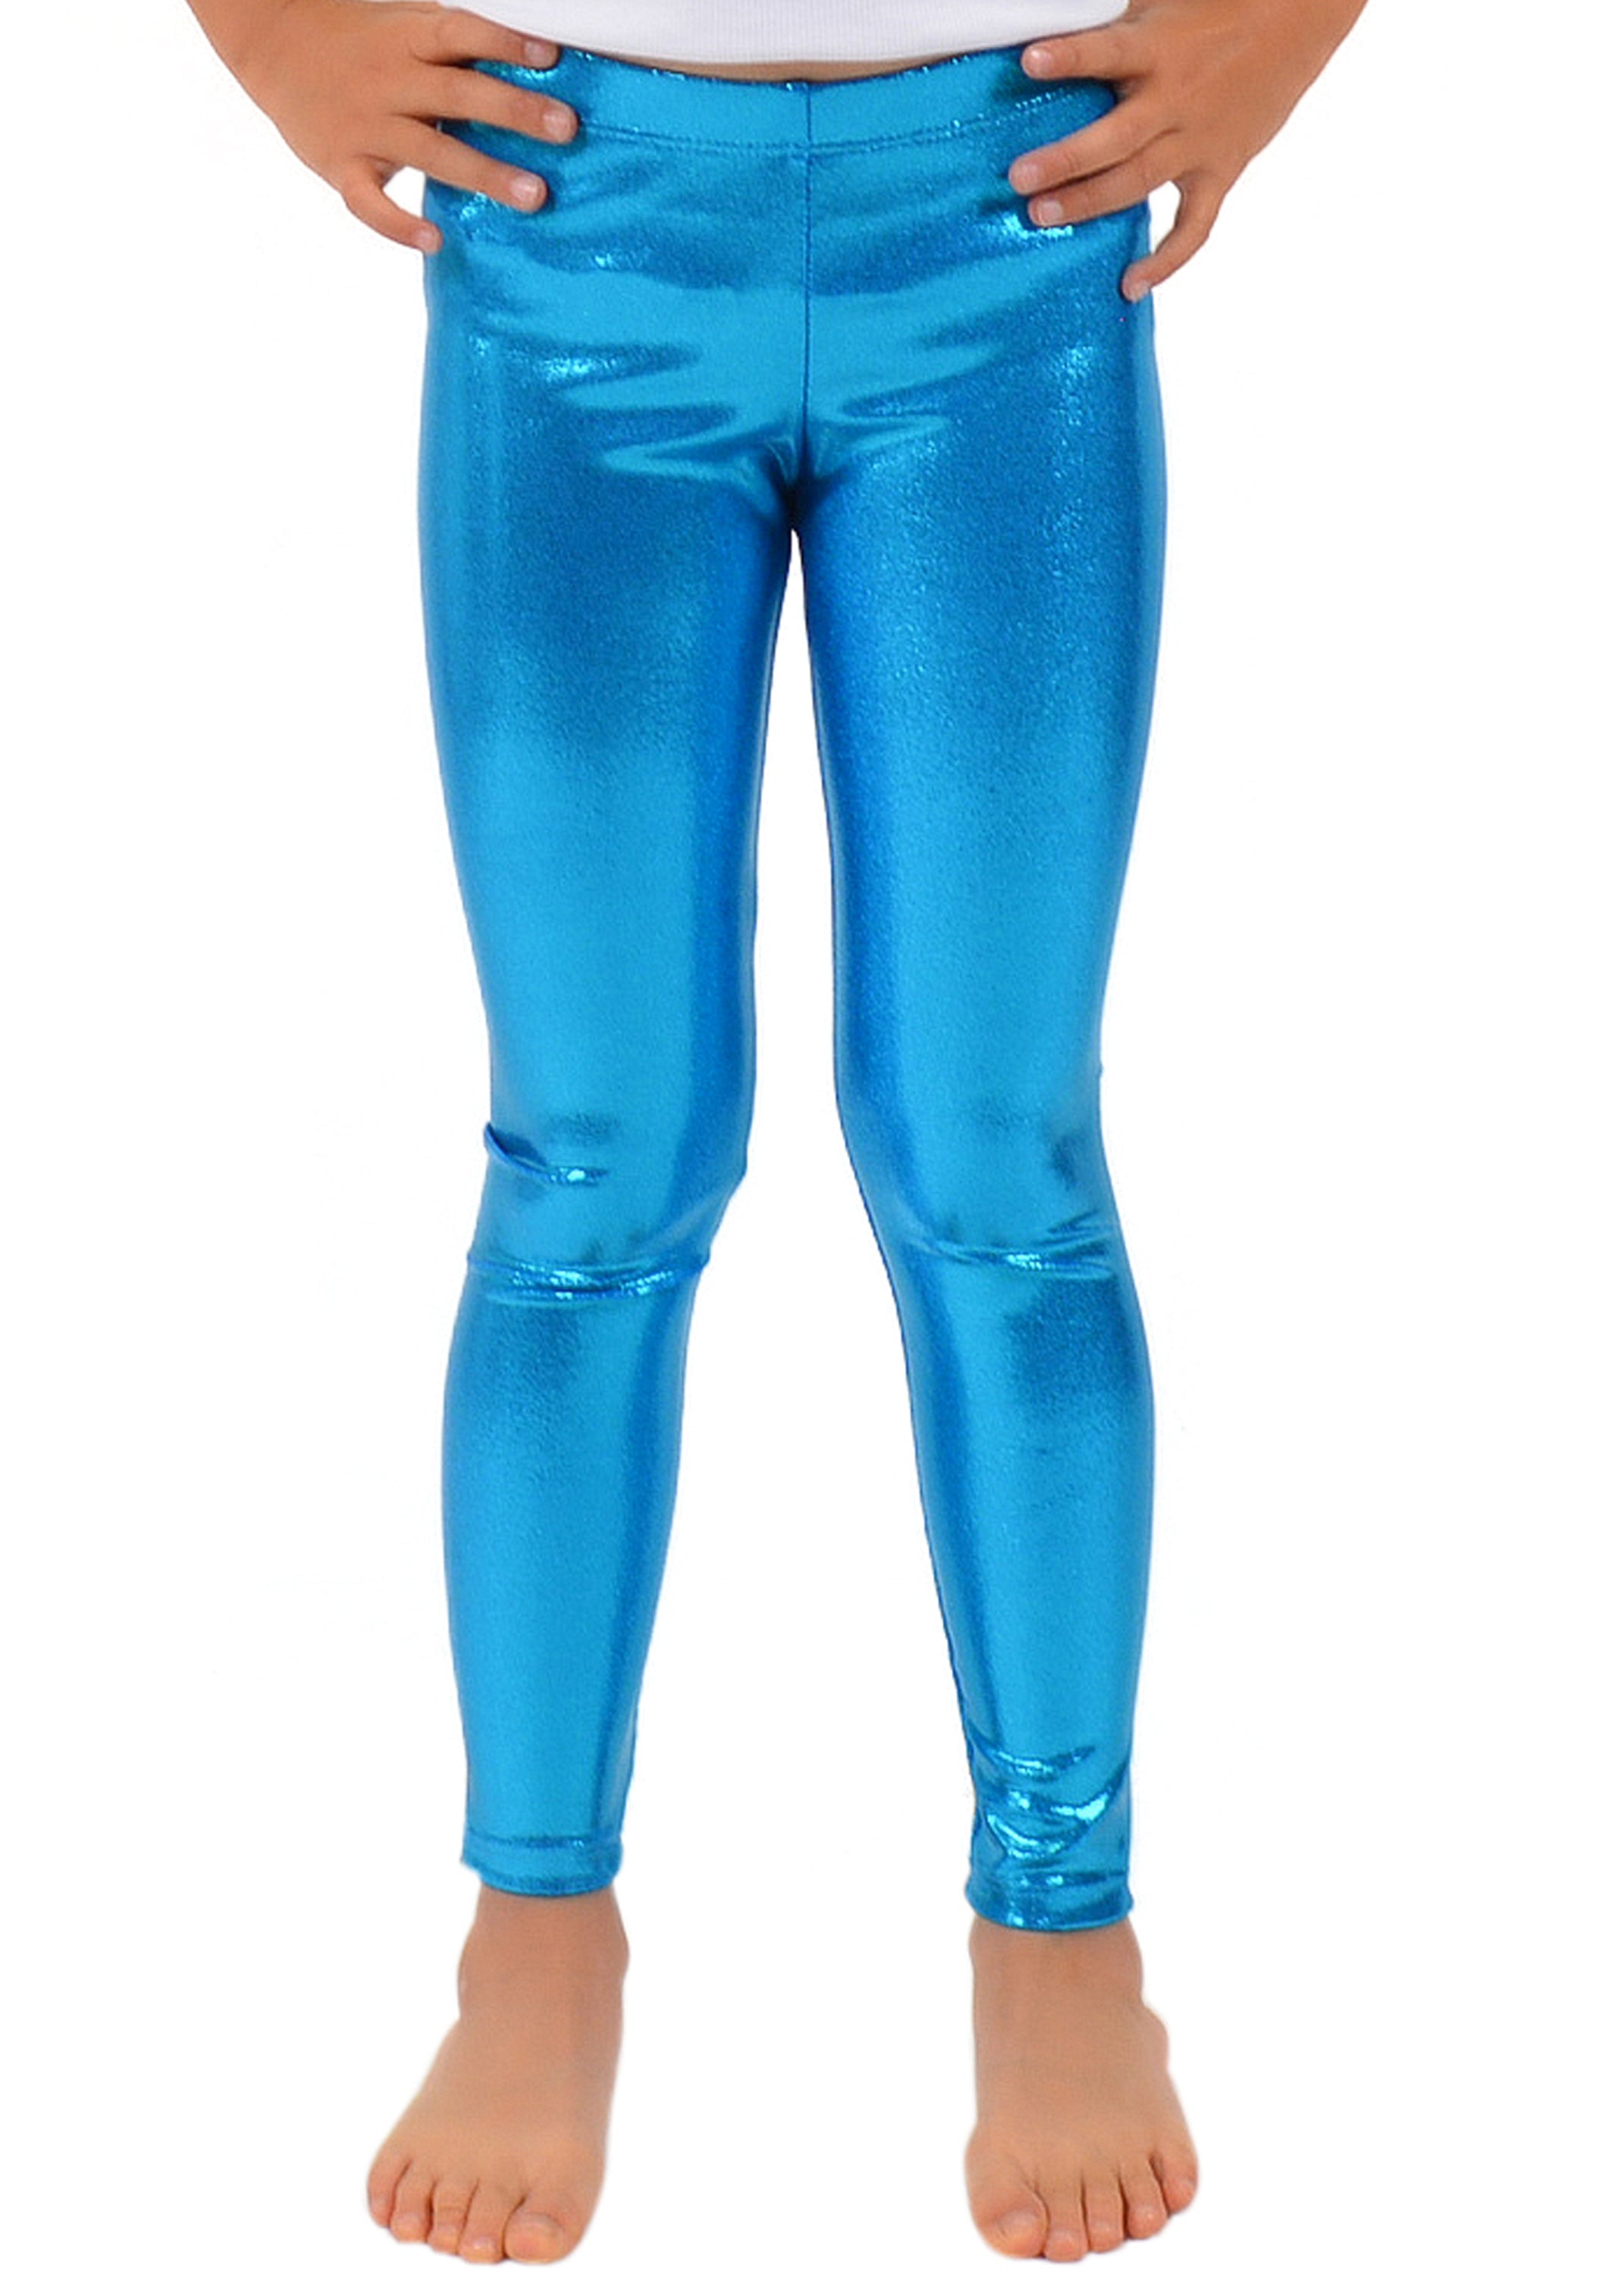 Stretch Is Comfort Girl's Metallic Mystique Leggings Shiny and Stretchy ...